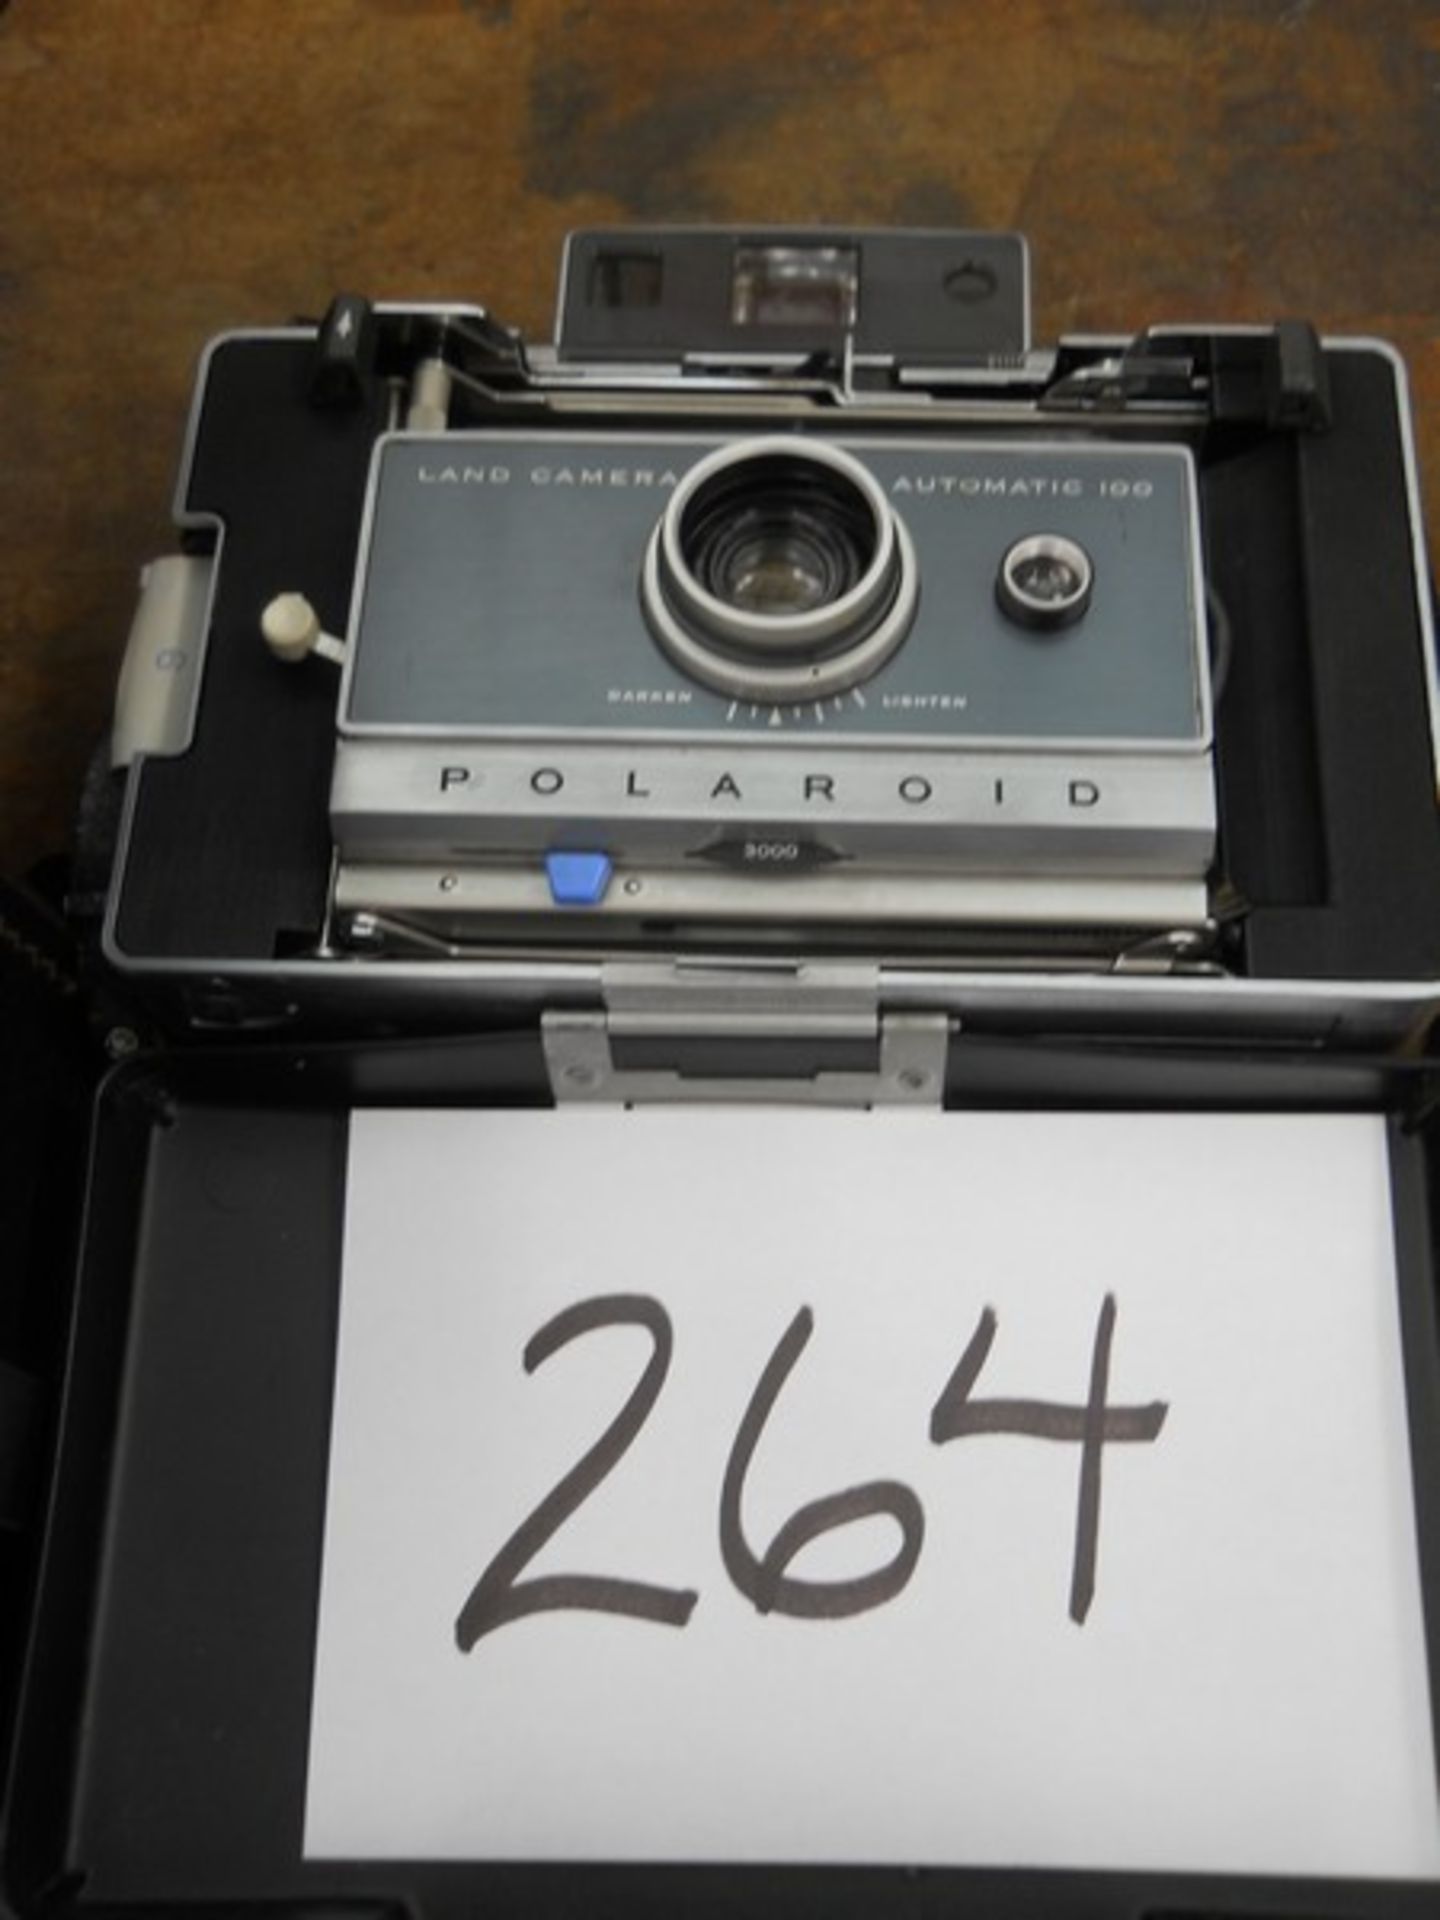 Polaroid Automatic 100 Land Camera. With Auxiliary Flash Unit, Carrying Case - Image 2 of 9